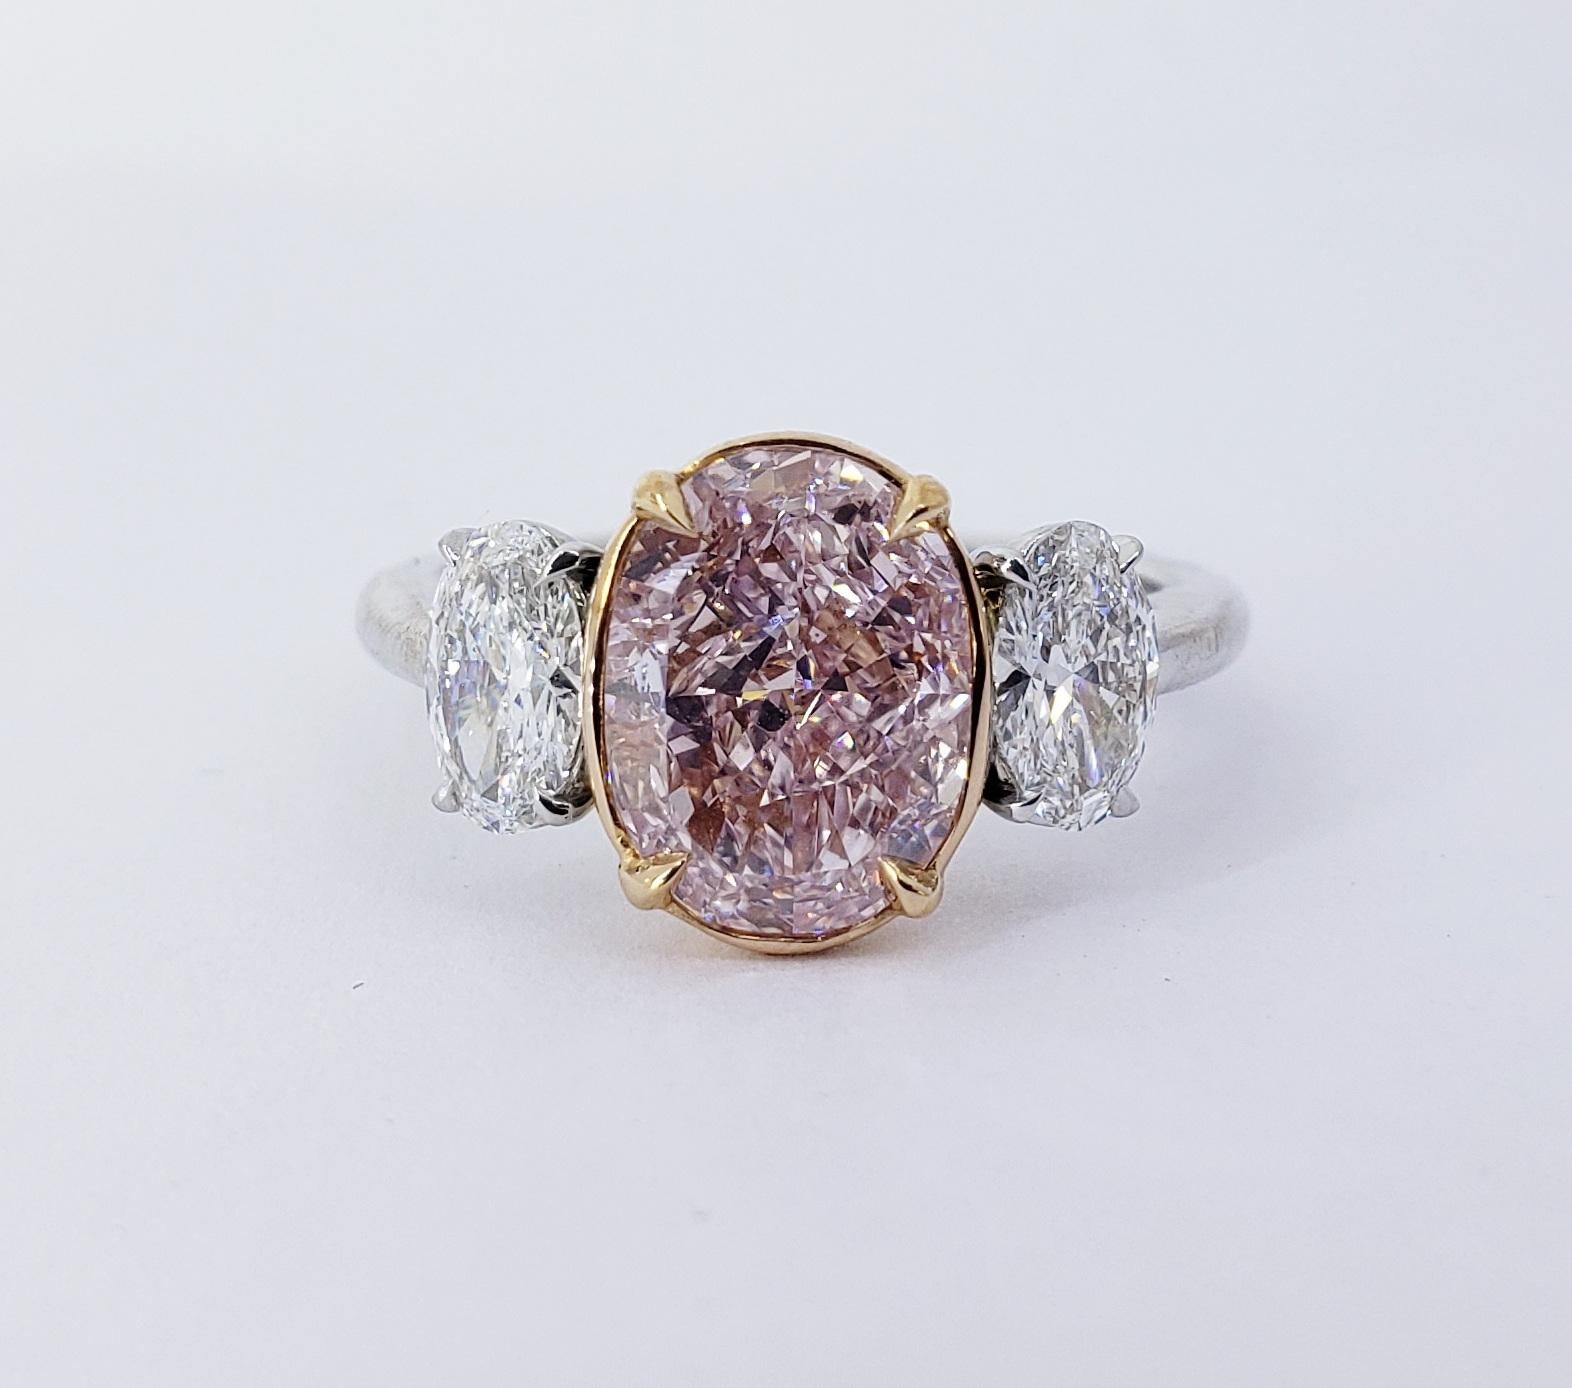 Rosenberg Diamonds & Co. 2.67 carat Oval cut Fancy Pink Purple VVS1 clarity is accompanied by a GIA certificate. This spectacular three stone rare pink diamond is set in a handmade platinum and 18k yellow gold setting with perfectly matched pair of